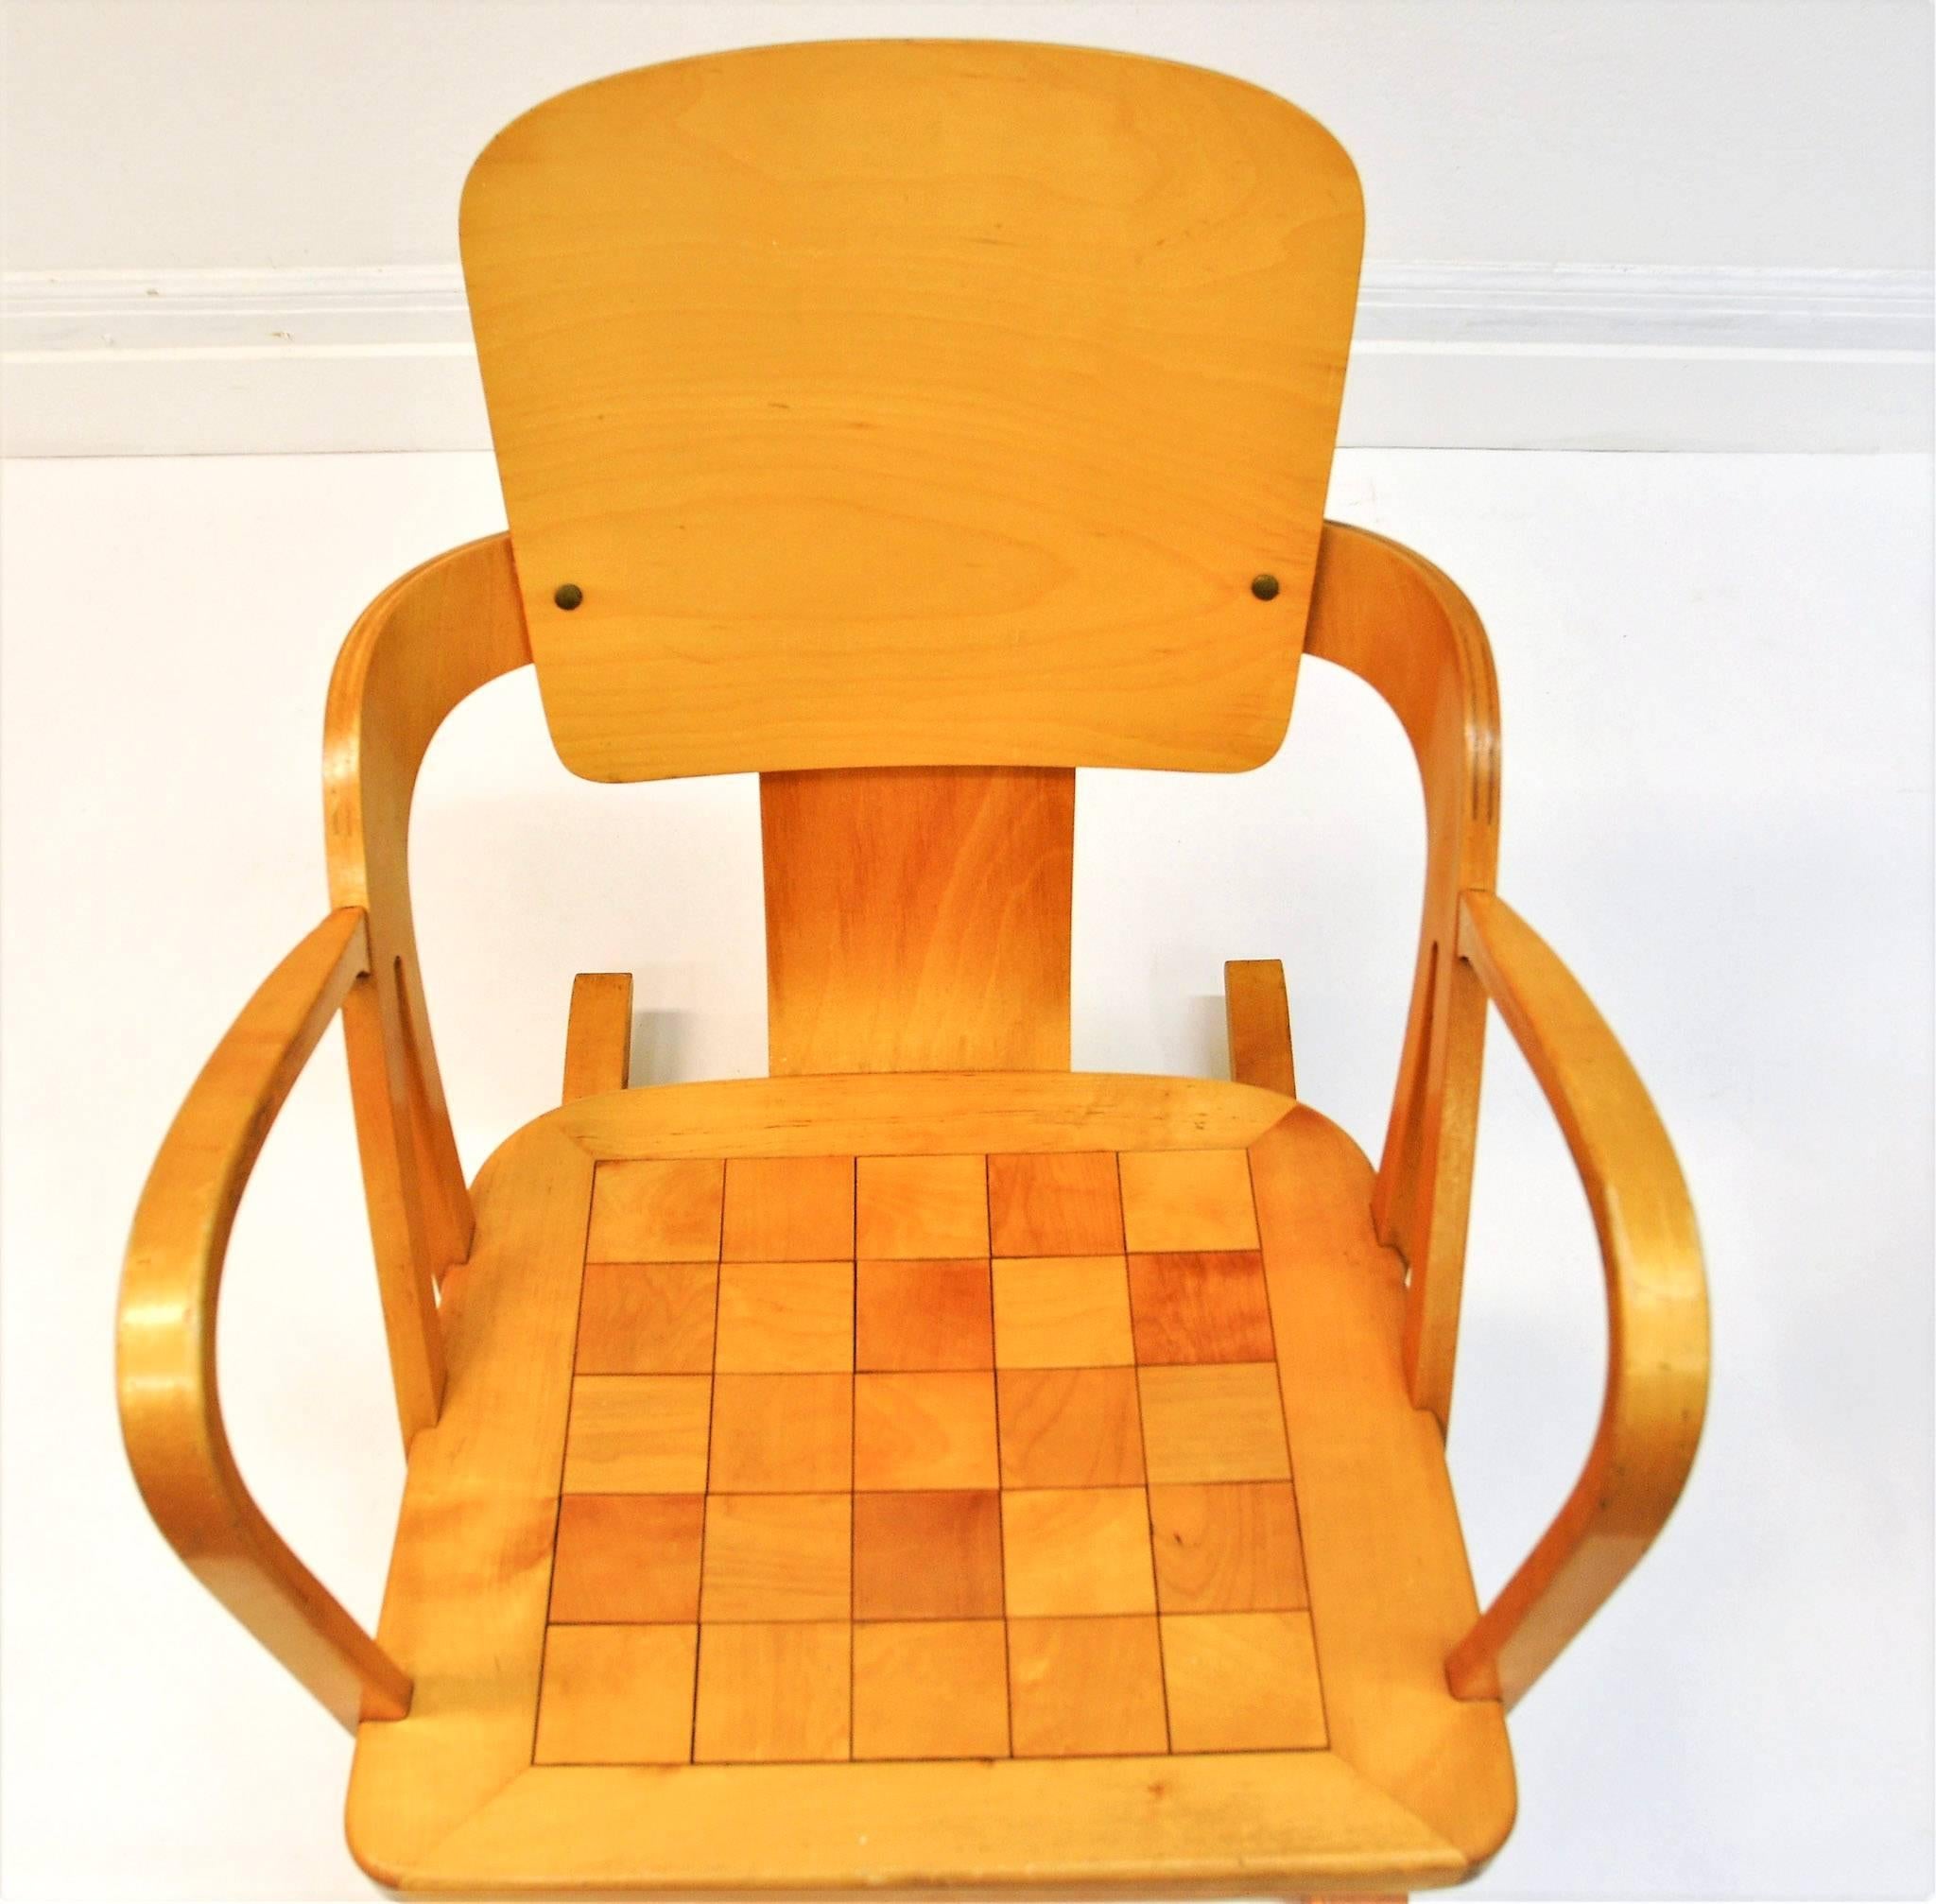 Lacquered Norwegian Rocking Chair with Chesspatterns 1940-50`s by Per Aaslid, Norway